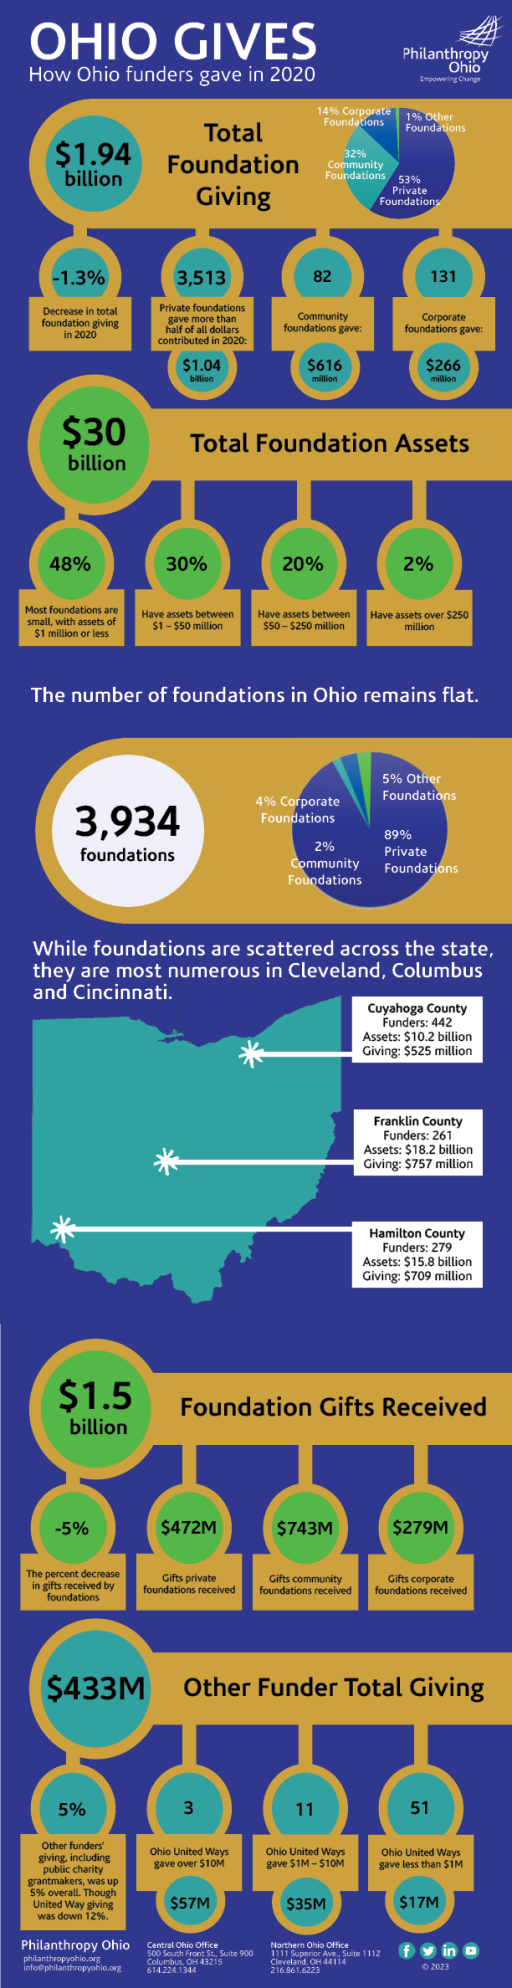 Ohio Gives Infographic